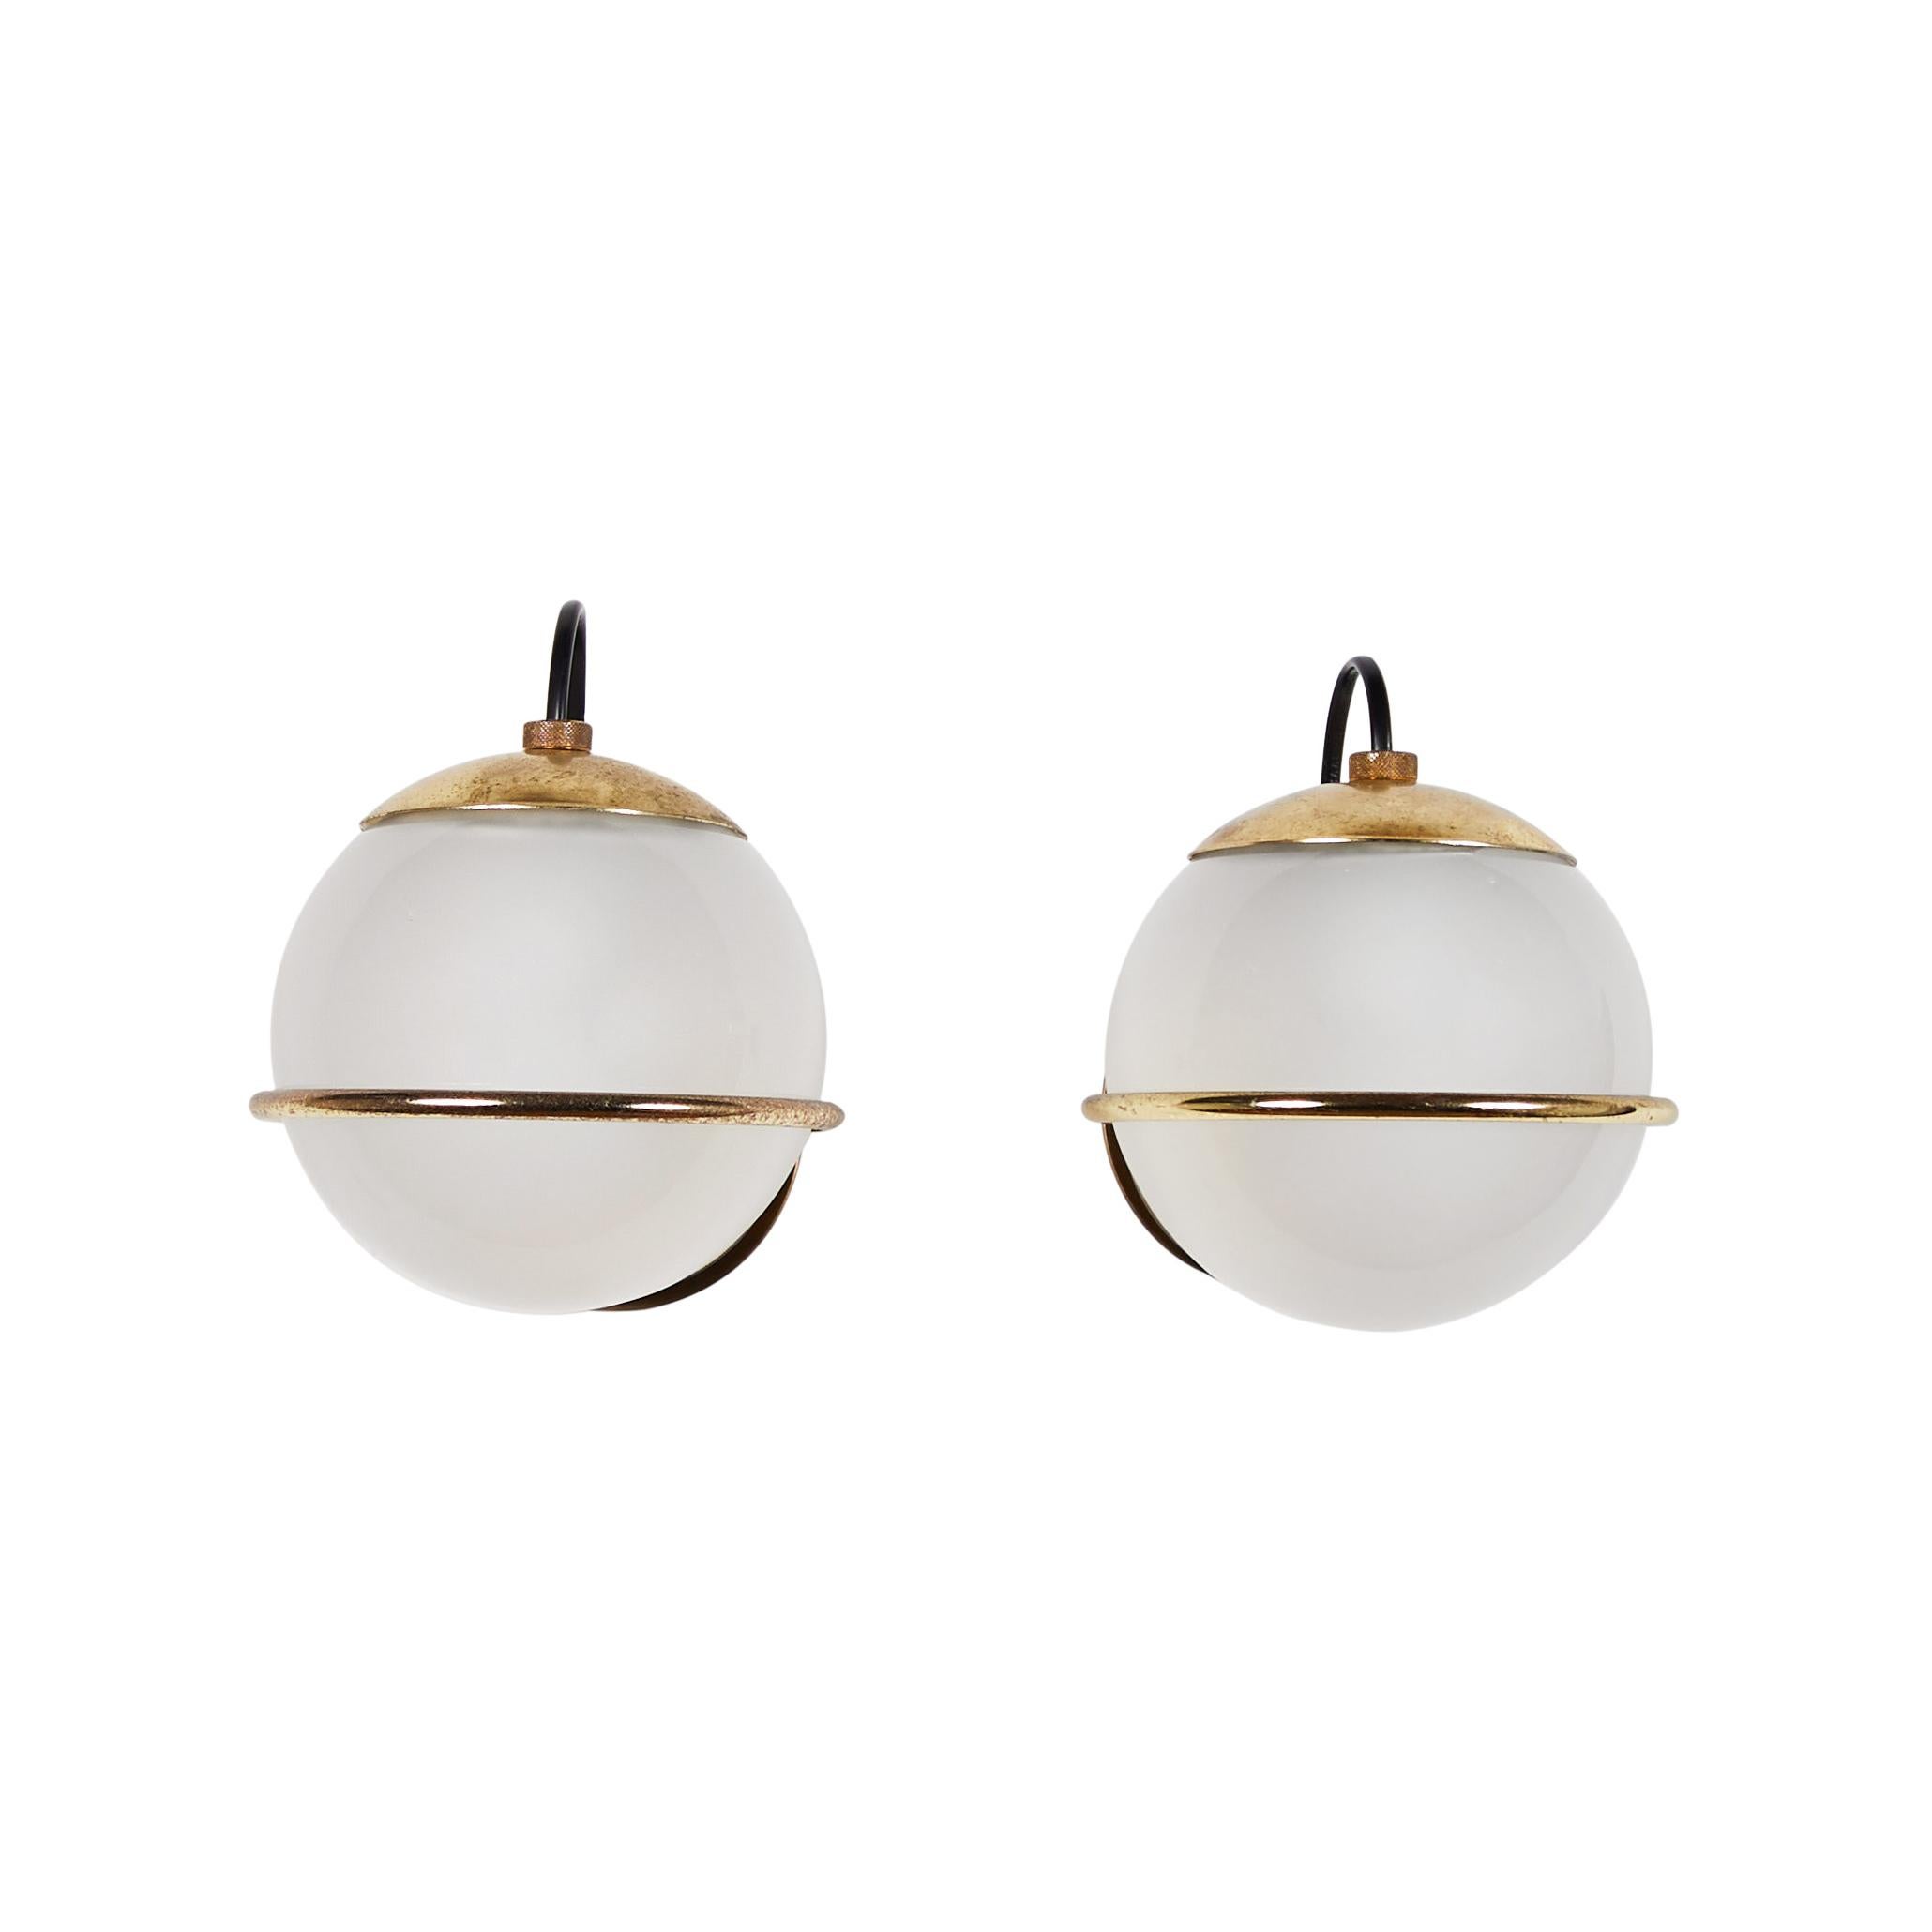 Pair of Model 237/1 Sconces by Gino Sarfatti for Arteluce